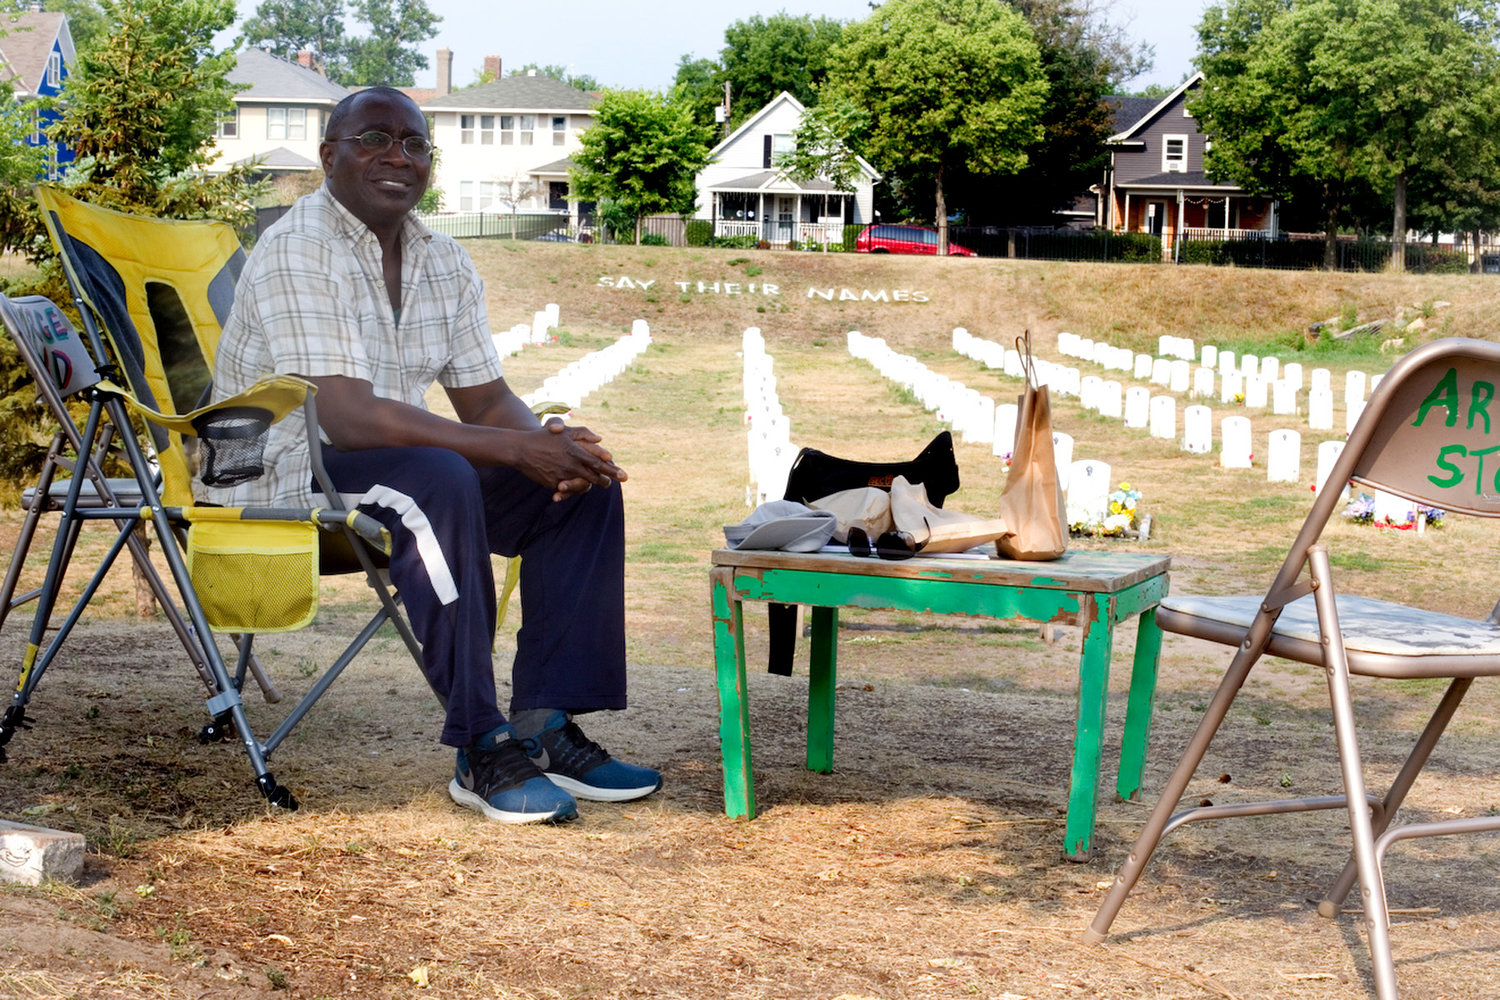 “For me, this is the most peaceful place on earth," explained Dr. Remi Douah, who is a listening presence at the "Say Their Names Cemetery" near George Floyd Square. "I can easily spend eight hours a day here. It’s not a chore; it’s not an intervention. It’s my way of life now. It’s what I structure my days around.” (Photo by Margie O’Loughlin)